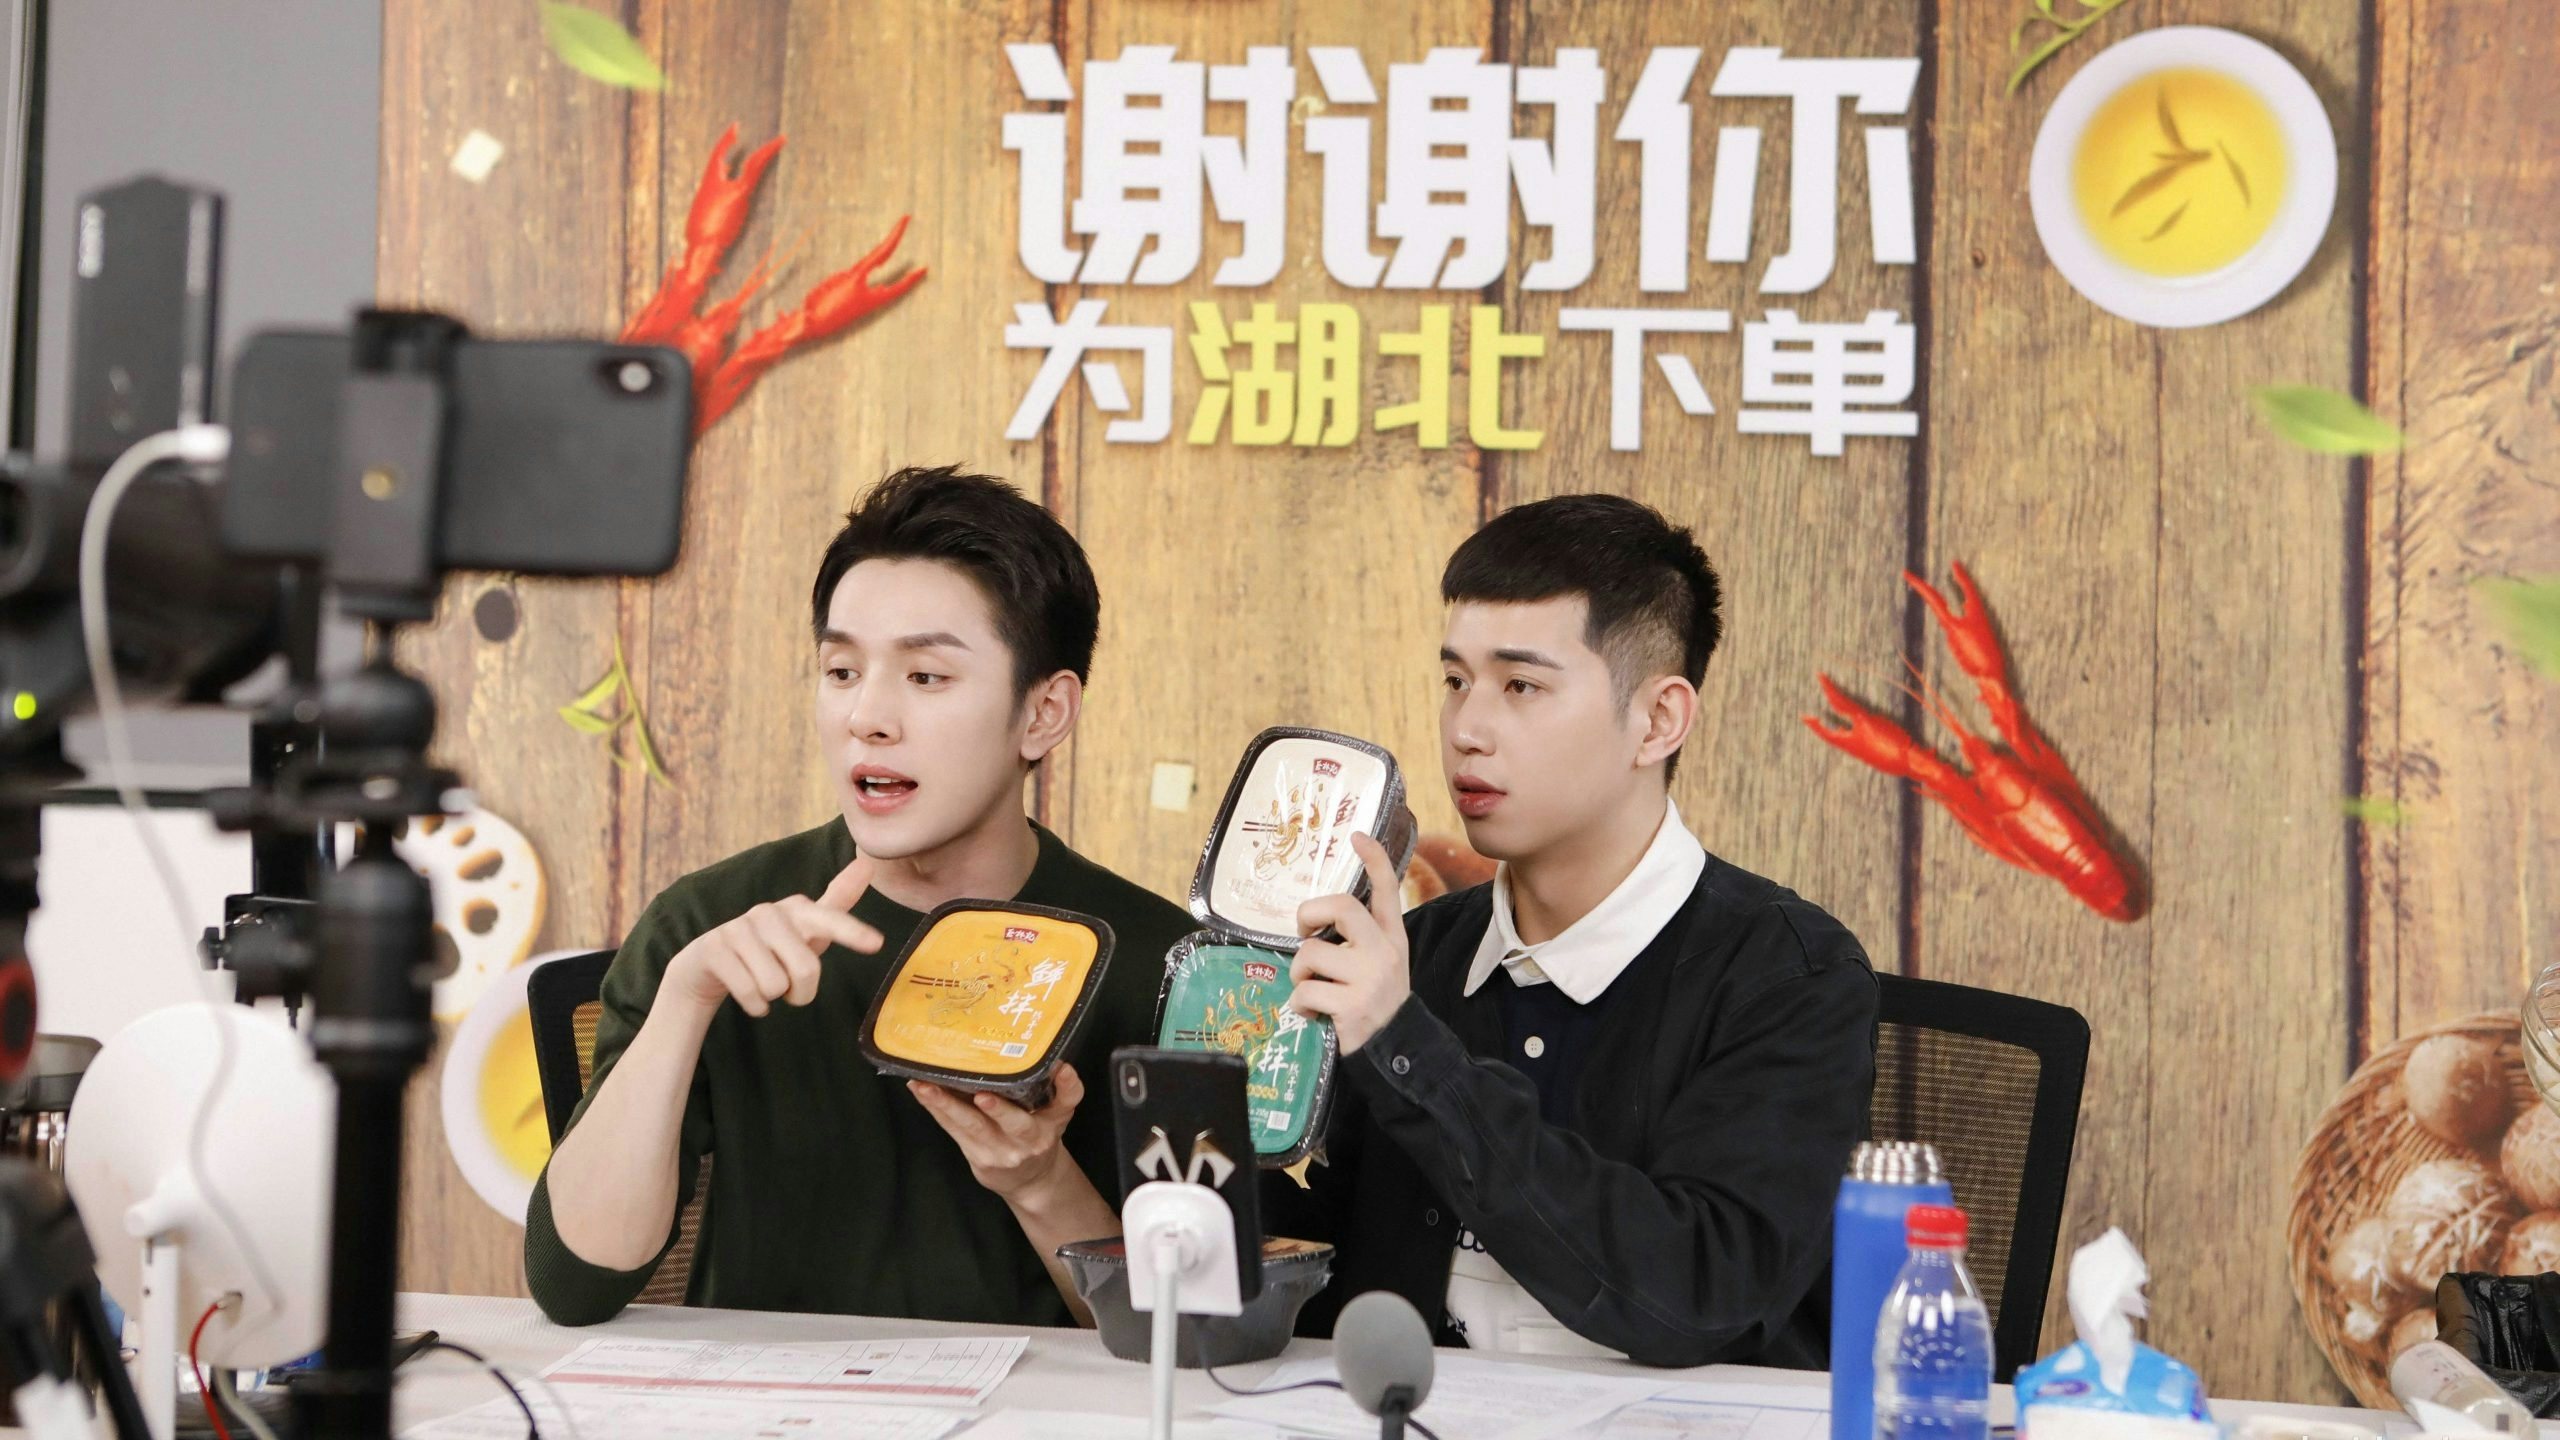 E-commerce livestreaming has evolved into a large part of China’s e-commerce sector. But what questions should brands ask before they start livestreaming? Photo: Li Jiaqi's Weibo